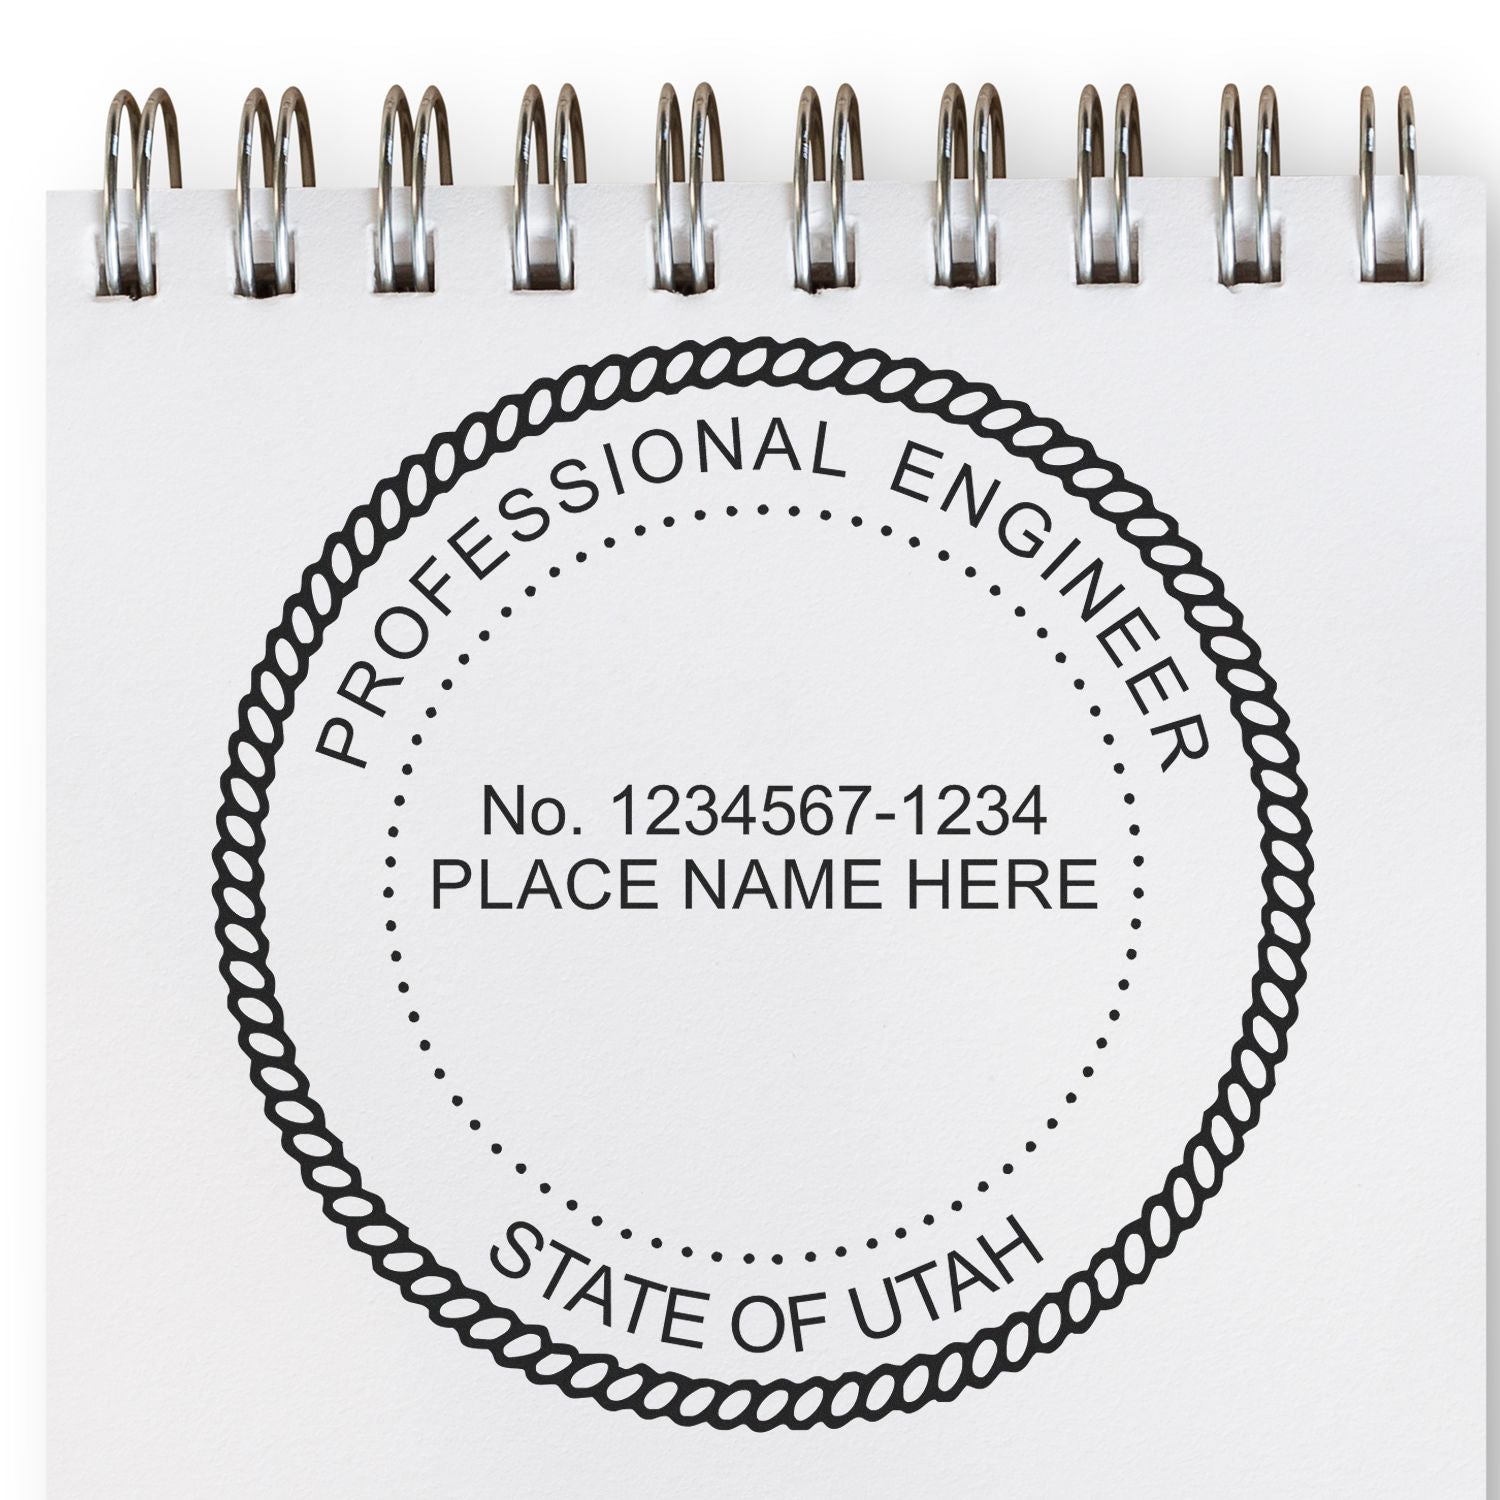 The main image for the Slim Pre-Inked Utah Professional Engineer Seal Stamp depicting a sample of the imprint and electronic files